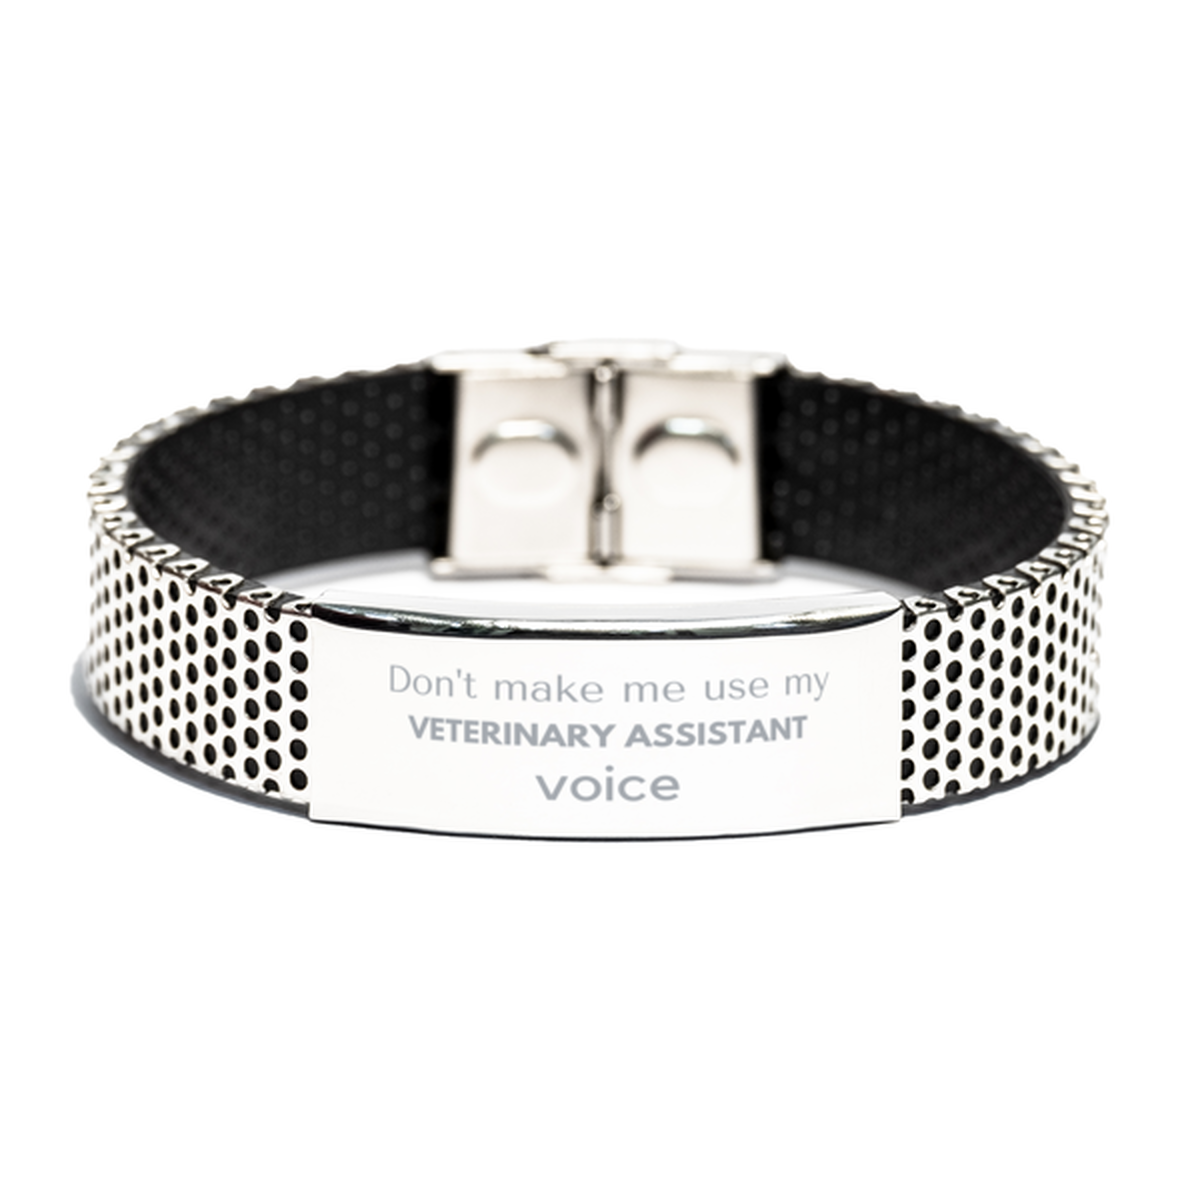 Don't make me use my Veterinary Assistant voice, Sarcasm Veterinary Assistant Gifts, Christmas Veterinary Assistant Stainless Steel Bracelet Birthday Unique Gifts For Veterinary Assistant Coworkers, Men, Women, Colleague, Friends